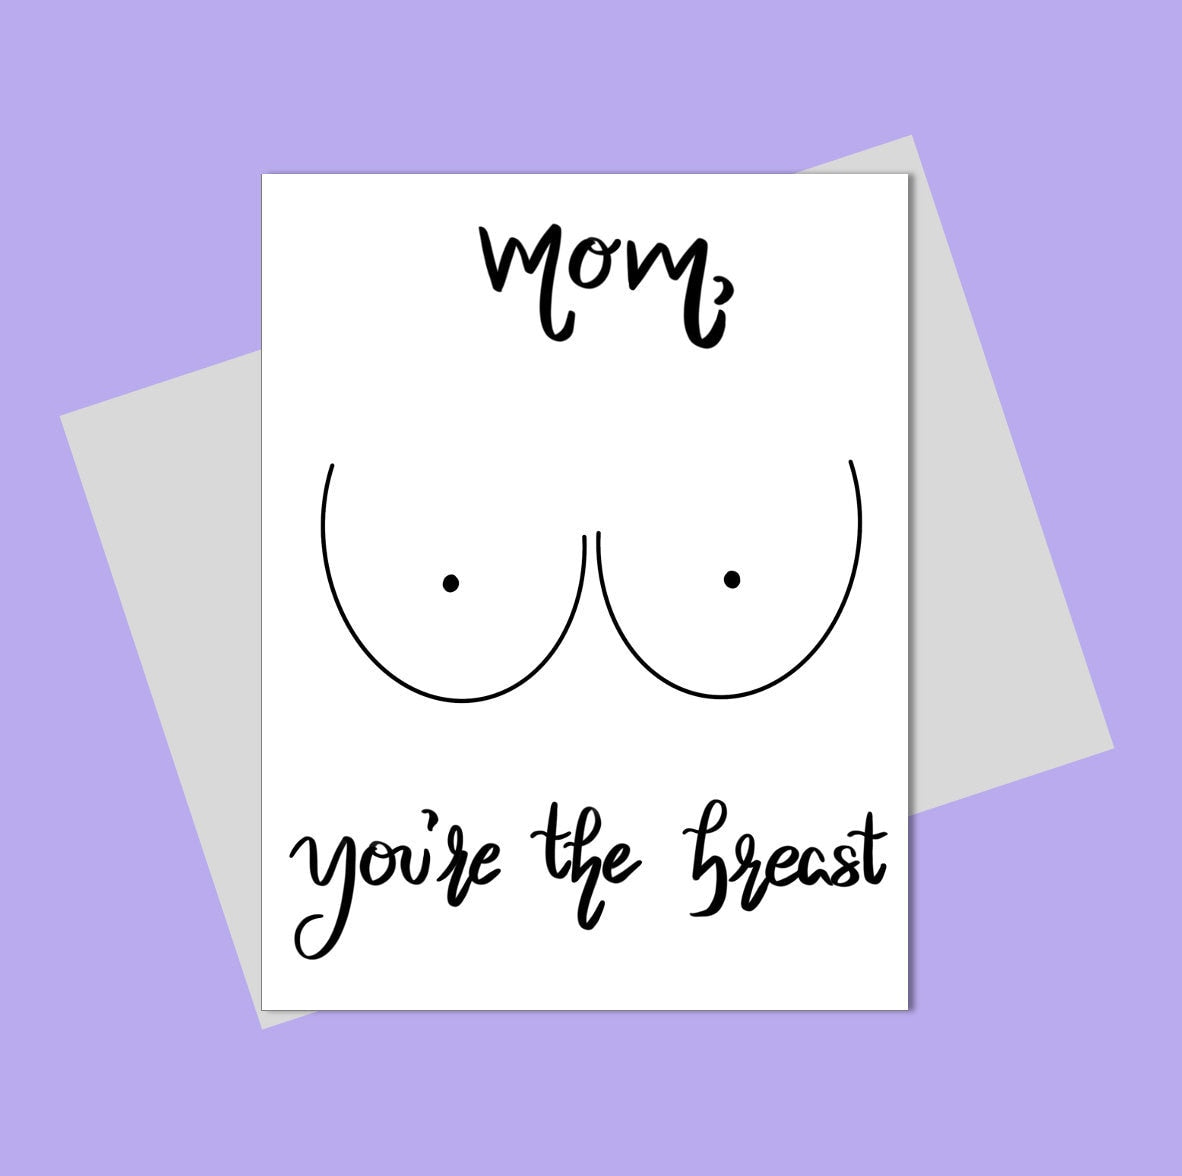 Funny Birthday Card/Card for Mom/Funny Birthday card for Mom/You're the best/You're the breast